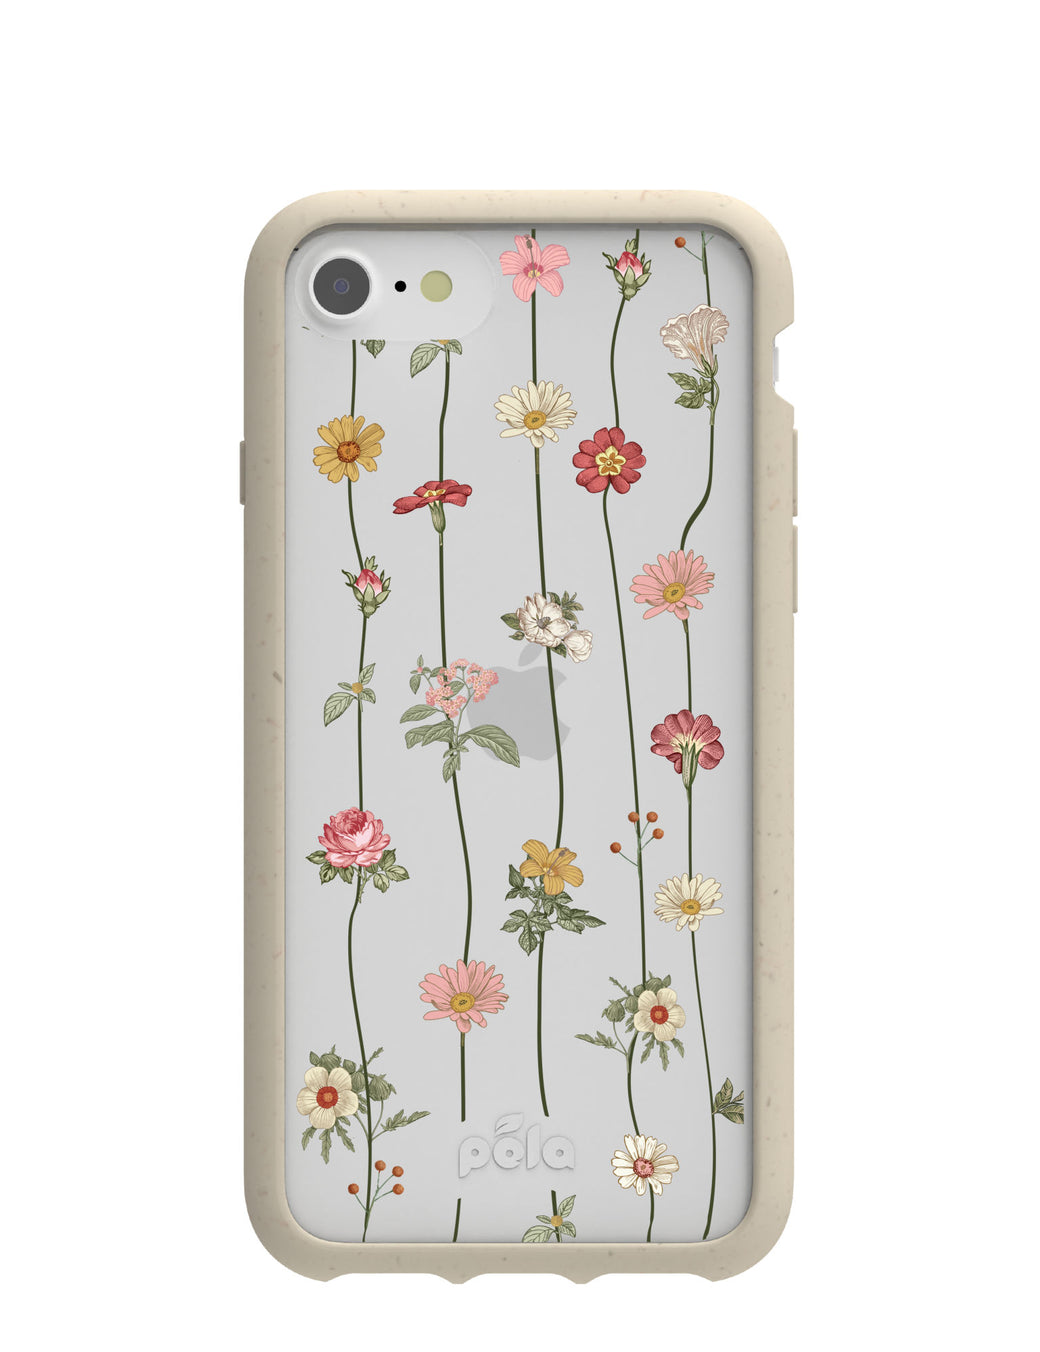 Clear Floral Vines iPhone 6/6s/7/8/SE Case With London Fog Ridge